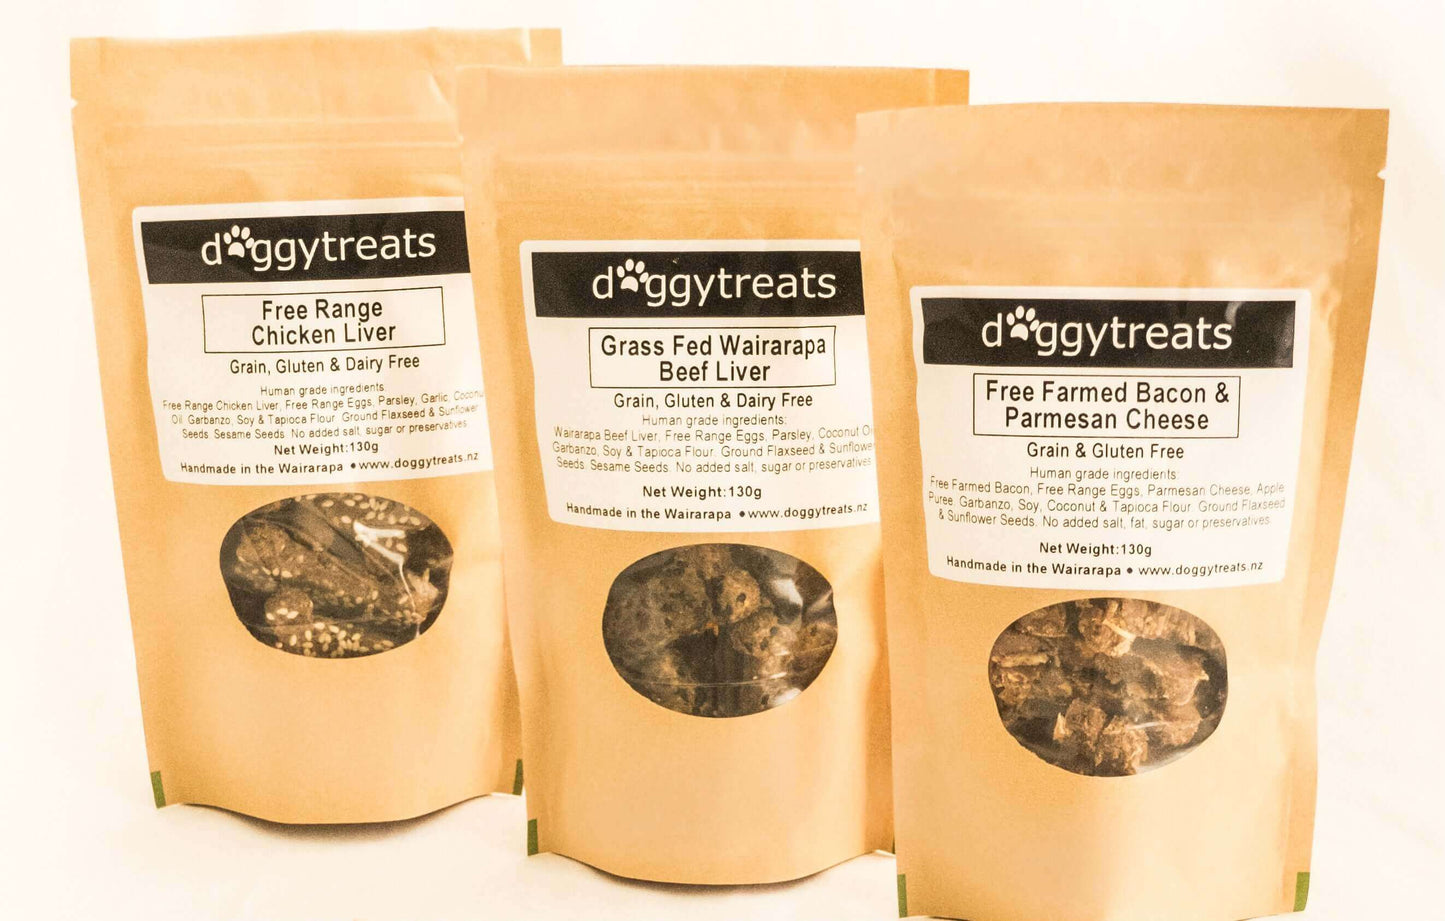 Natural, nutritious, delicious New Zealand made dog treats